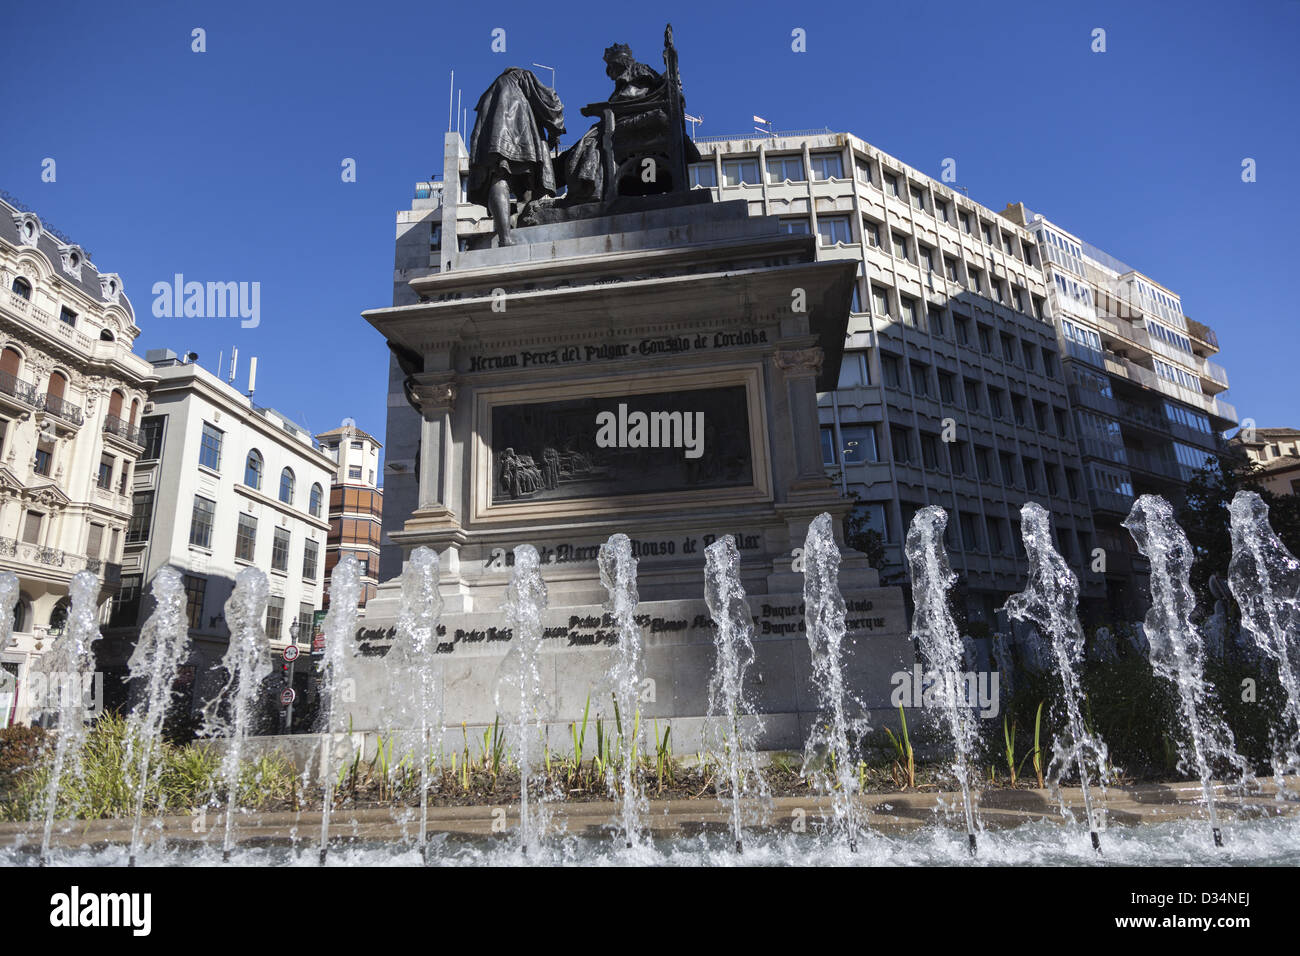 Plaza de Isabel la Catolica. Statue shows Queen Isabel granting Columbus' petition to obtain ships and supplies. Granada Spain Stock Photo